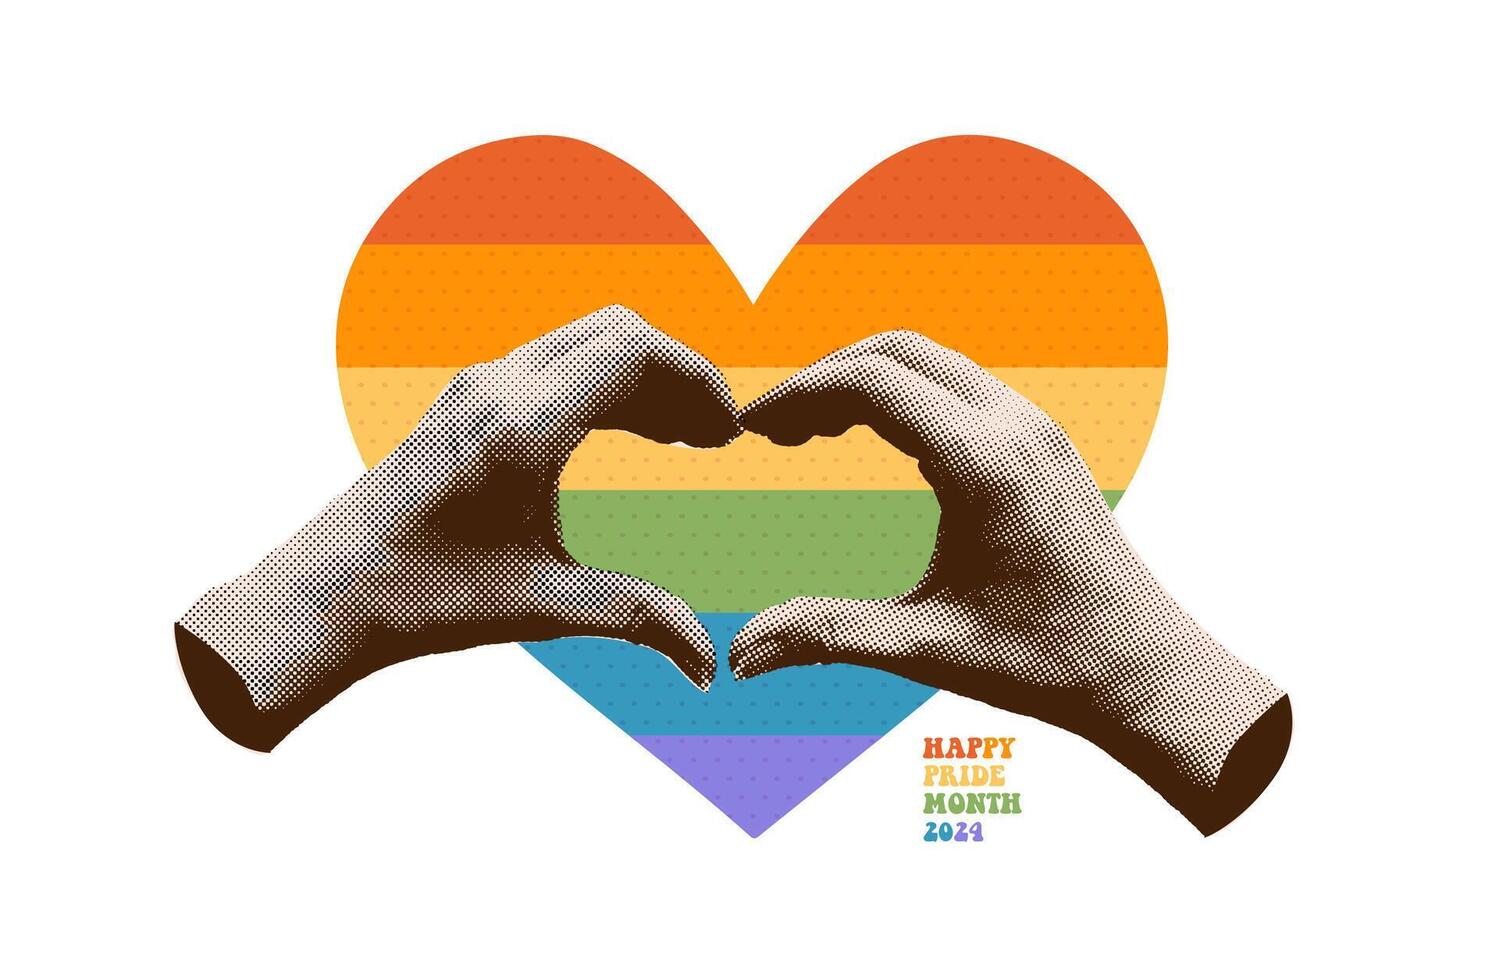 Trendy halftone collage for Pride month banner template. Heart shaped hands with heart shaped LGBT rainbow emblem. Gender, diversity, unity concept. vintage illustration vector